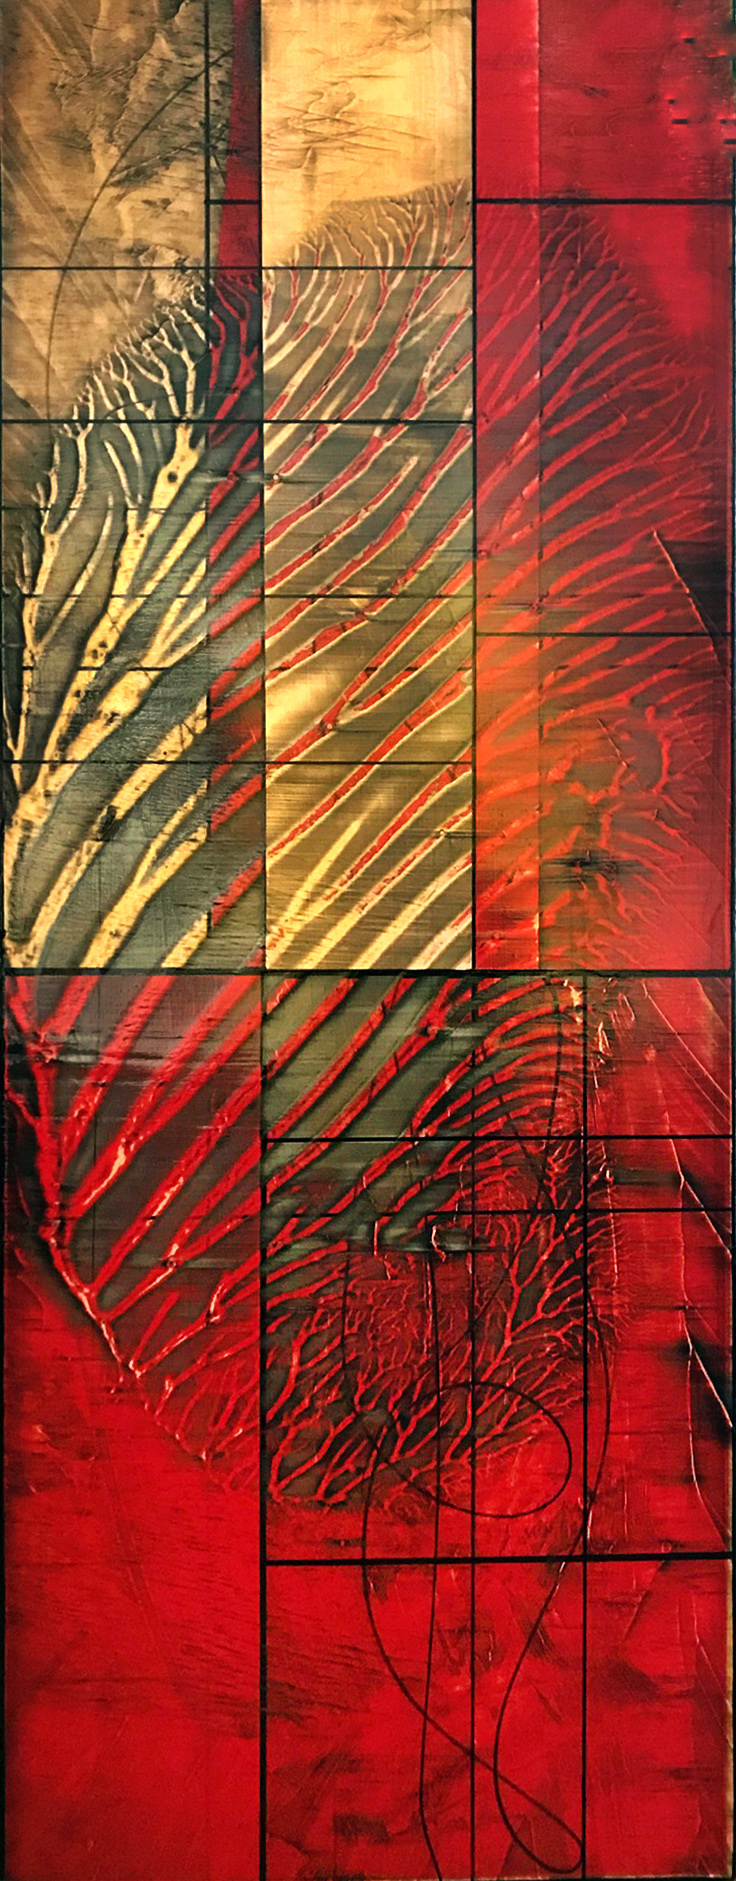 REDSIDER, acrylic on panel, 48 x 18 inches